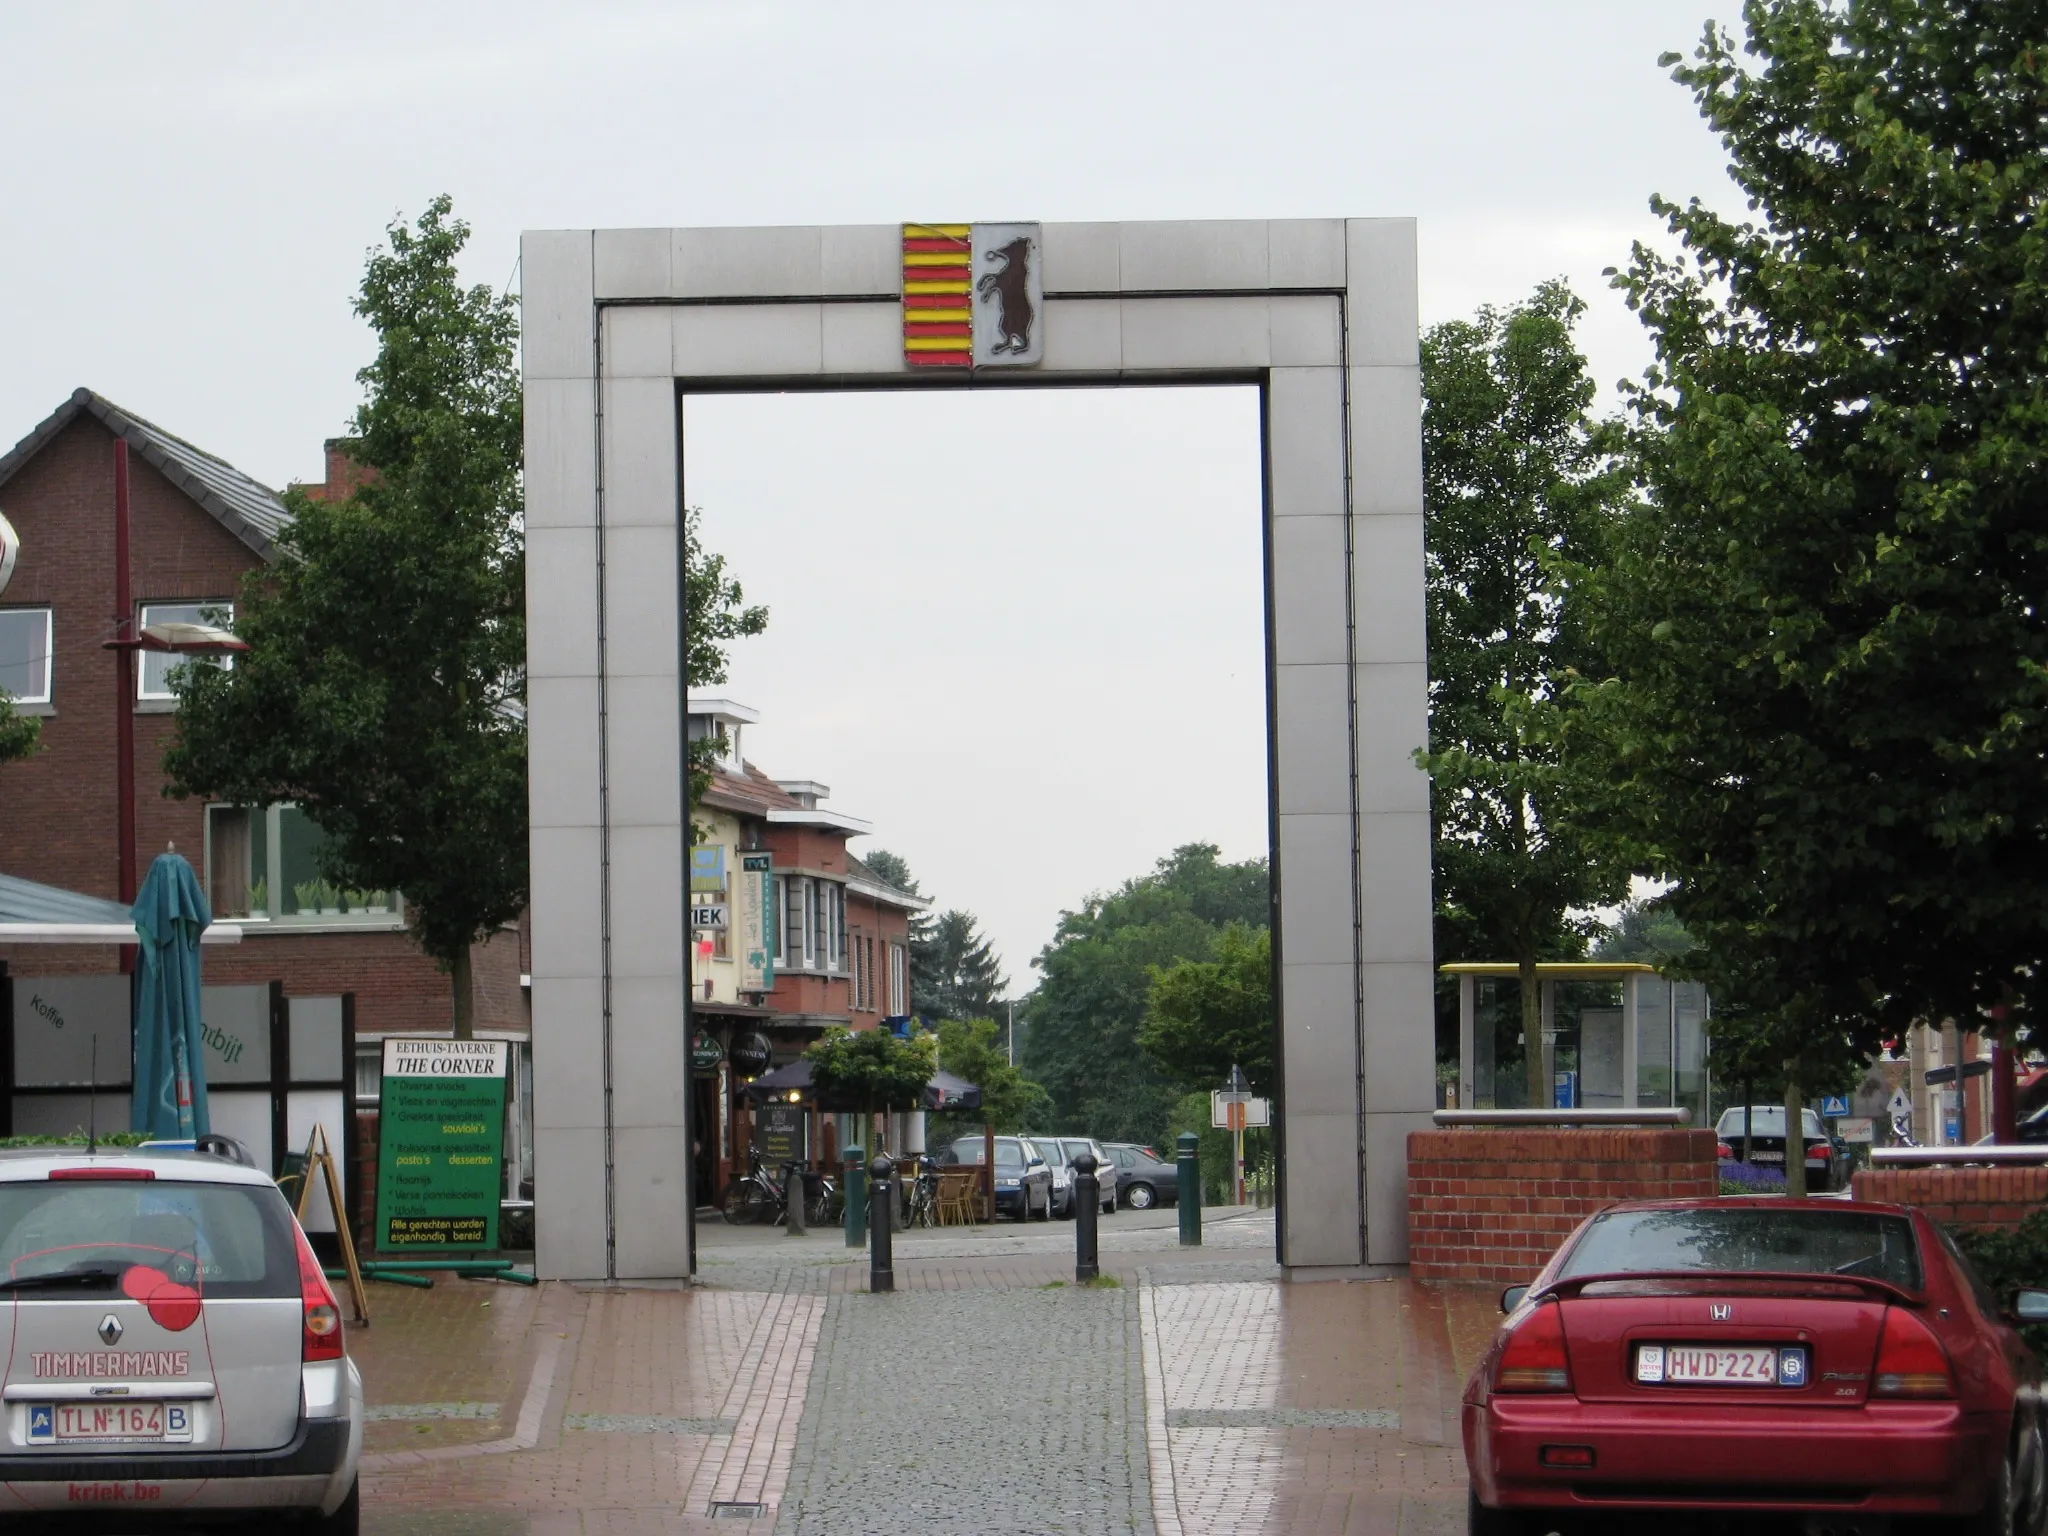 Photo showing: The "Paalse Poort", the old and now dismantled symbolic gateway at the exit of the central square in Beringen, Limburg, Belgium